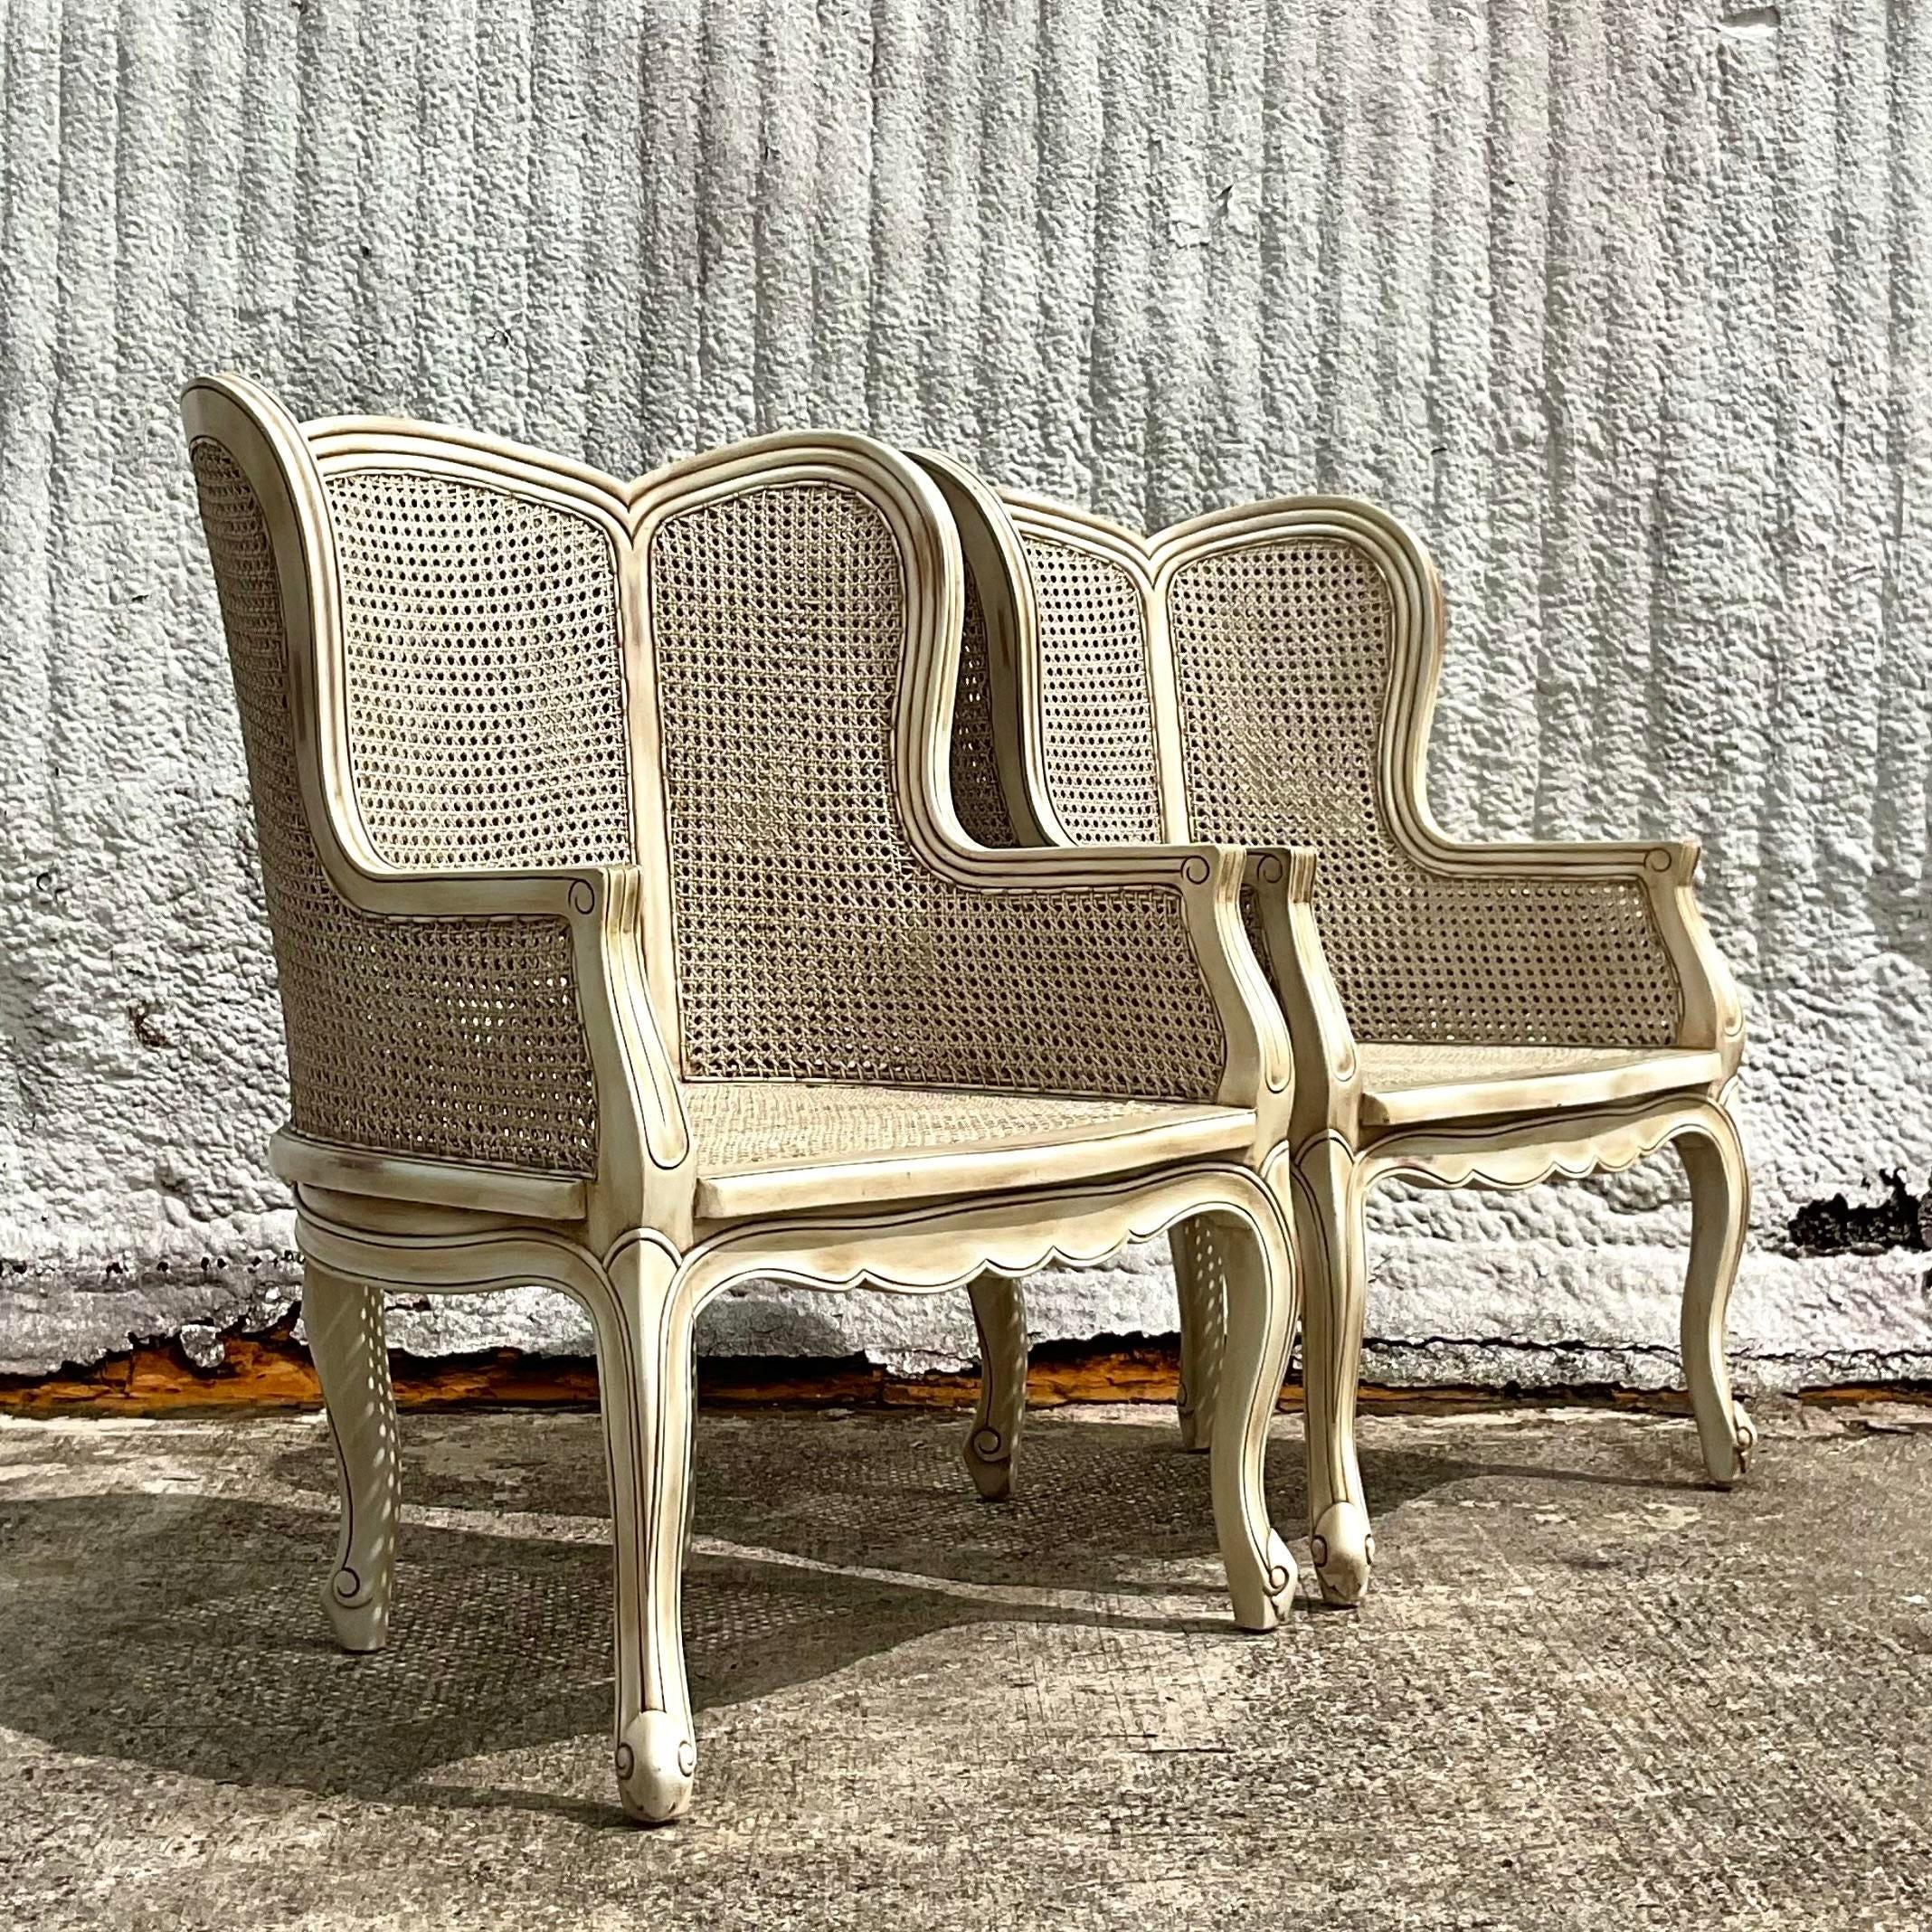 A truly beautiful pair of vintage Regency Wingback chairs. Beautiful inset cane panels embedded in a lacquered wood frame. Real showstoppers. Acquired from a Palm Beach estate.